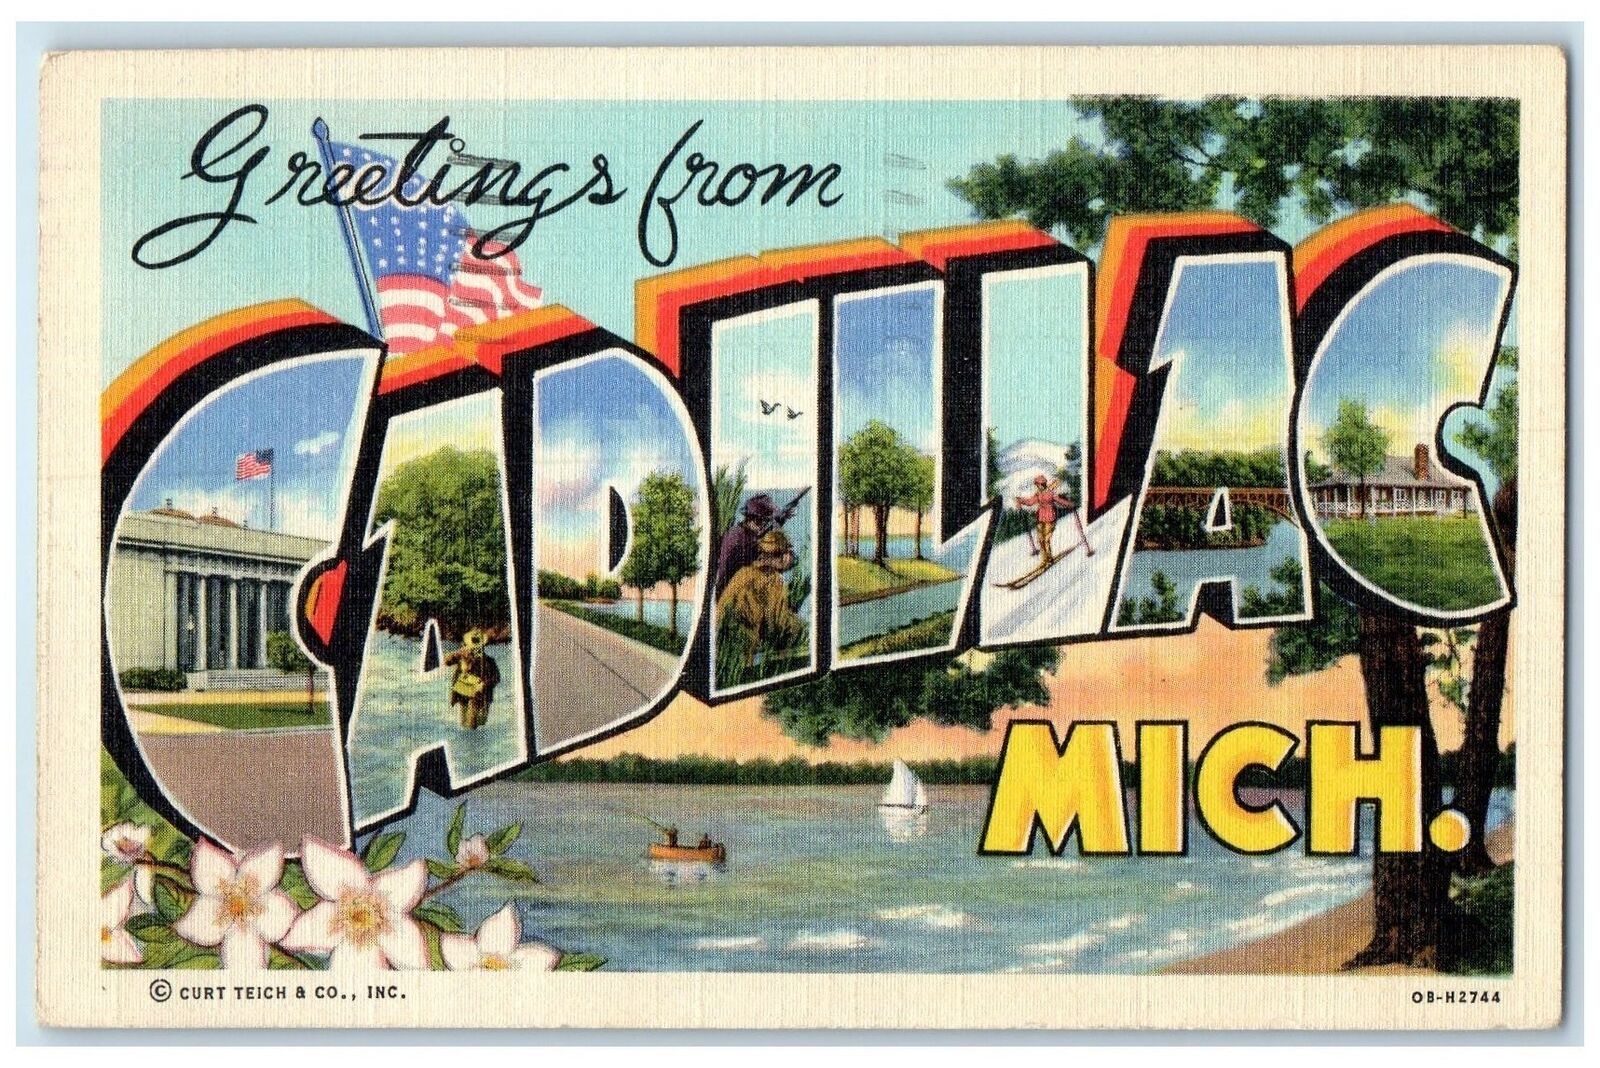 1949 Large Letter Greetings From Cadillac Michigan MI Posted Vintage Postcard